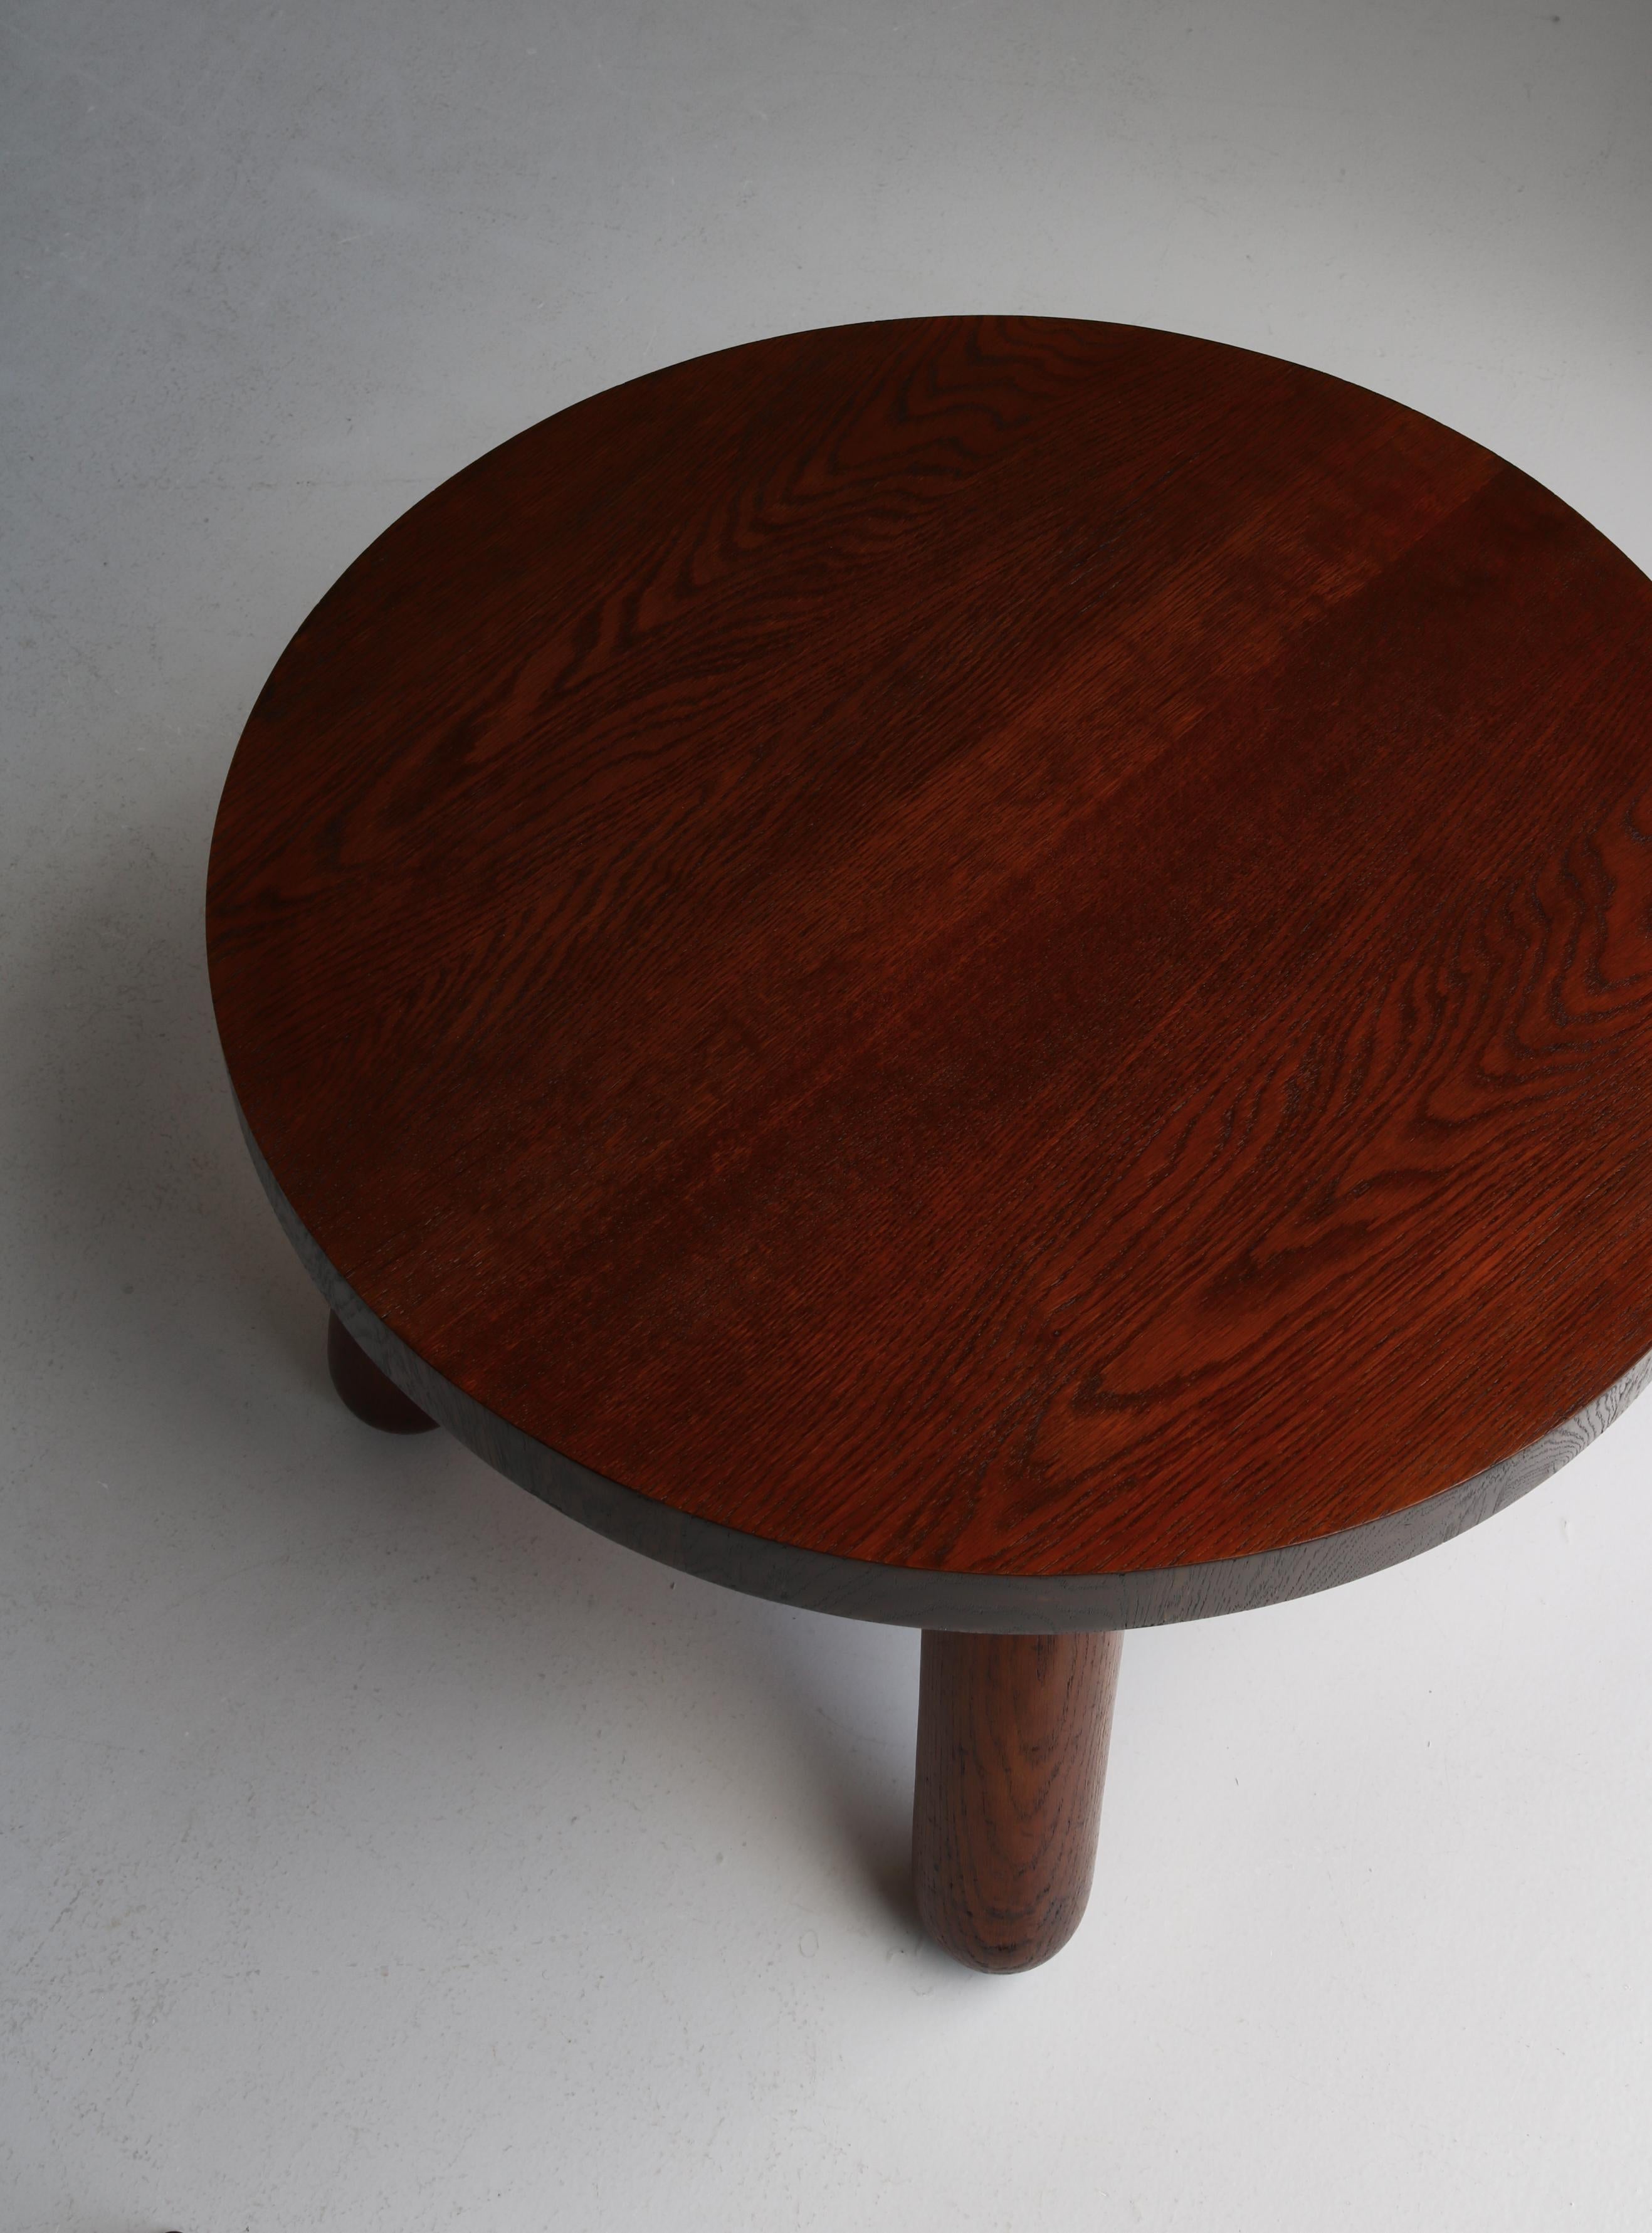 Chunky Danish Modern Side Table in Stained Oak by Otto Færge, Denmark, 1940s For Sale 1